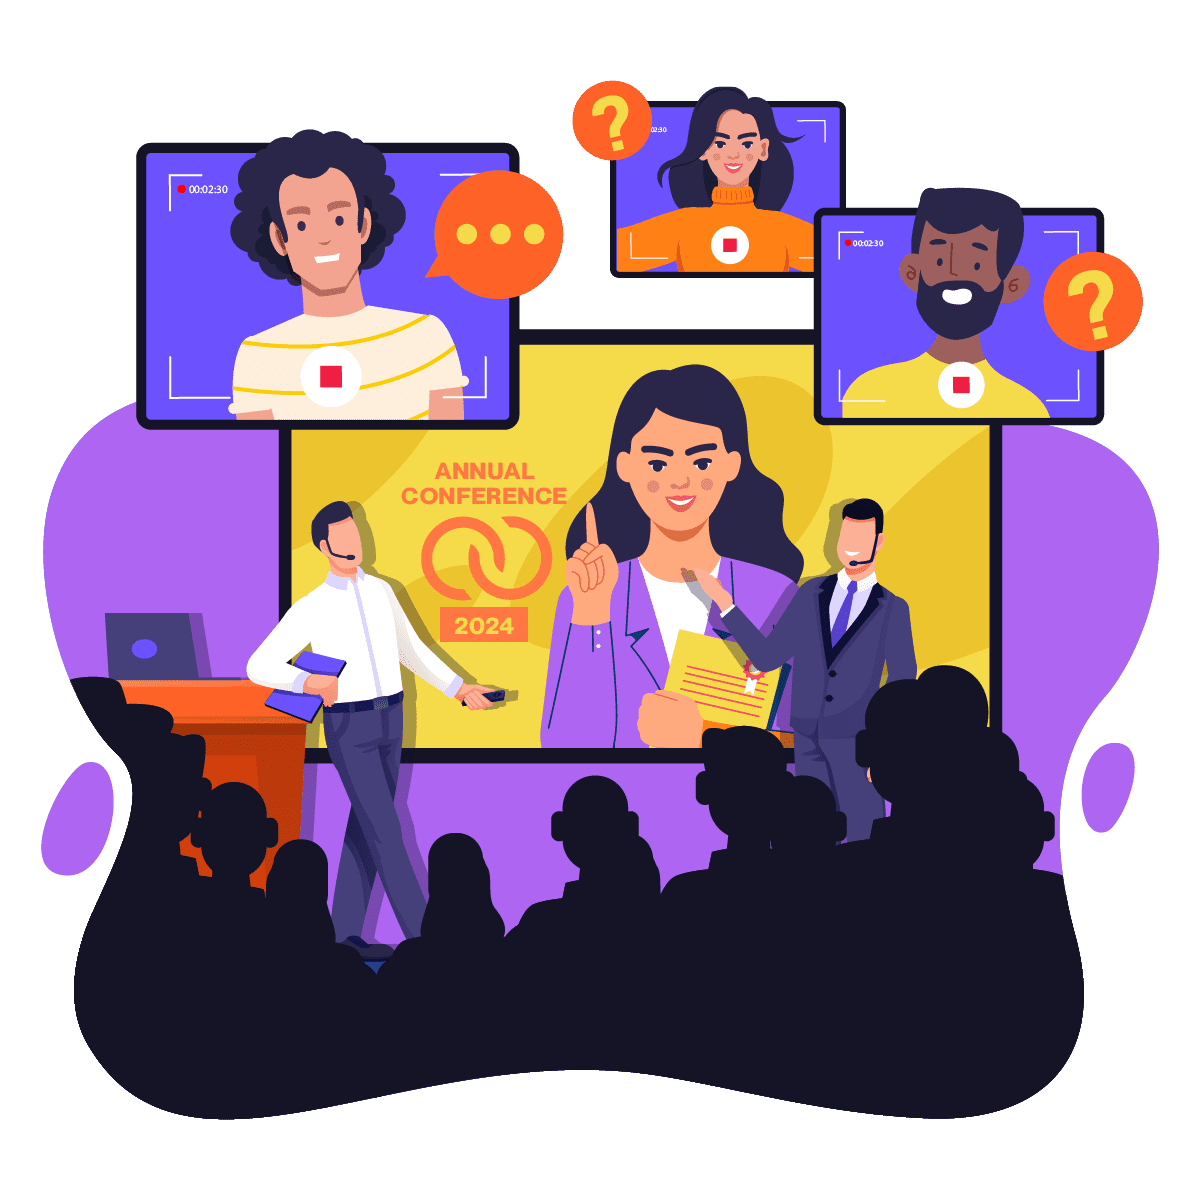 Collect Q&As via video for events with Vloggi